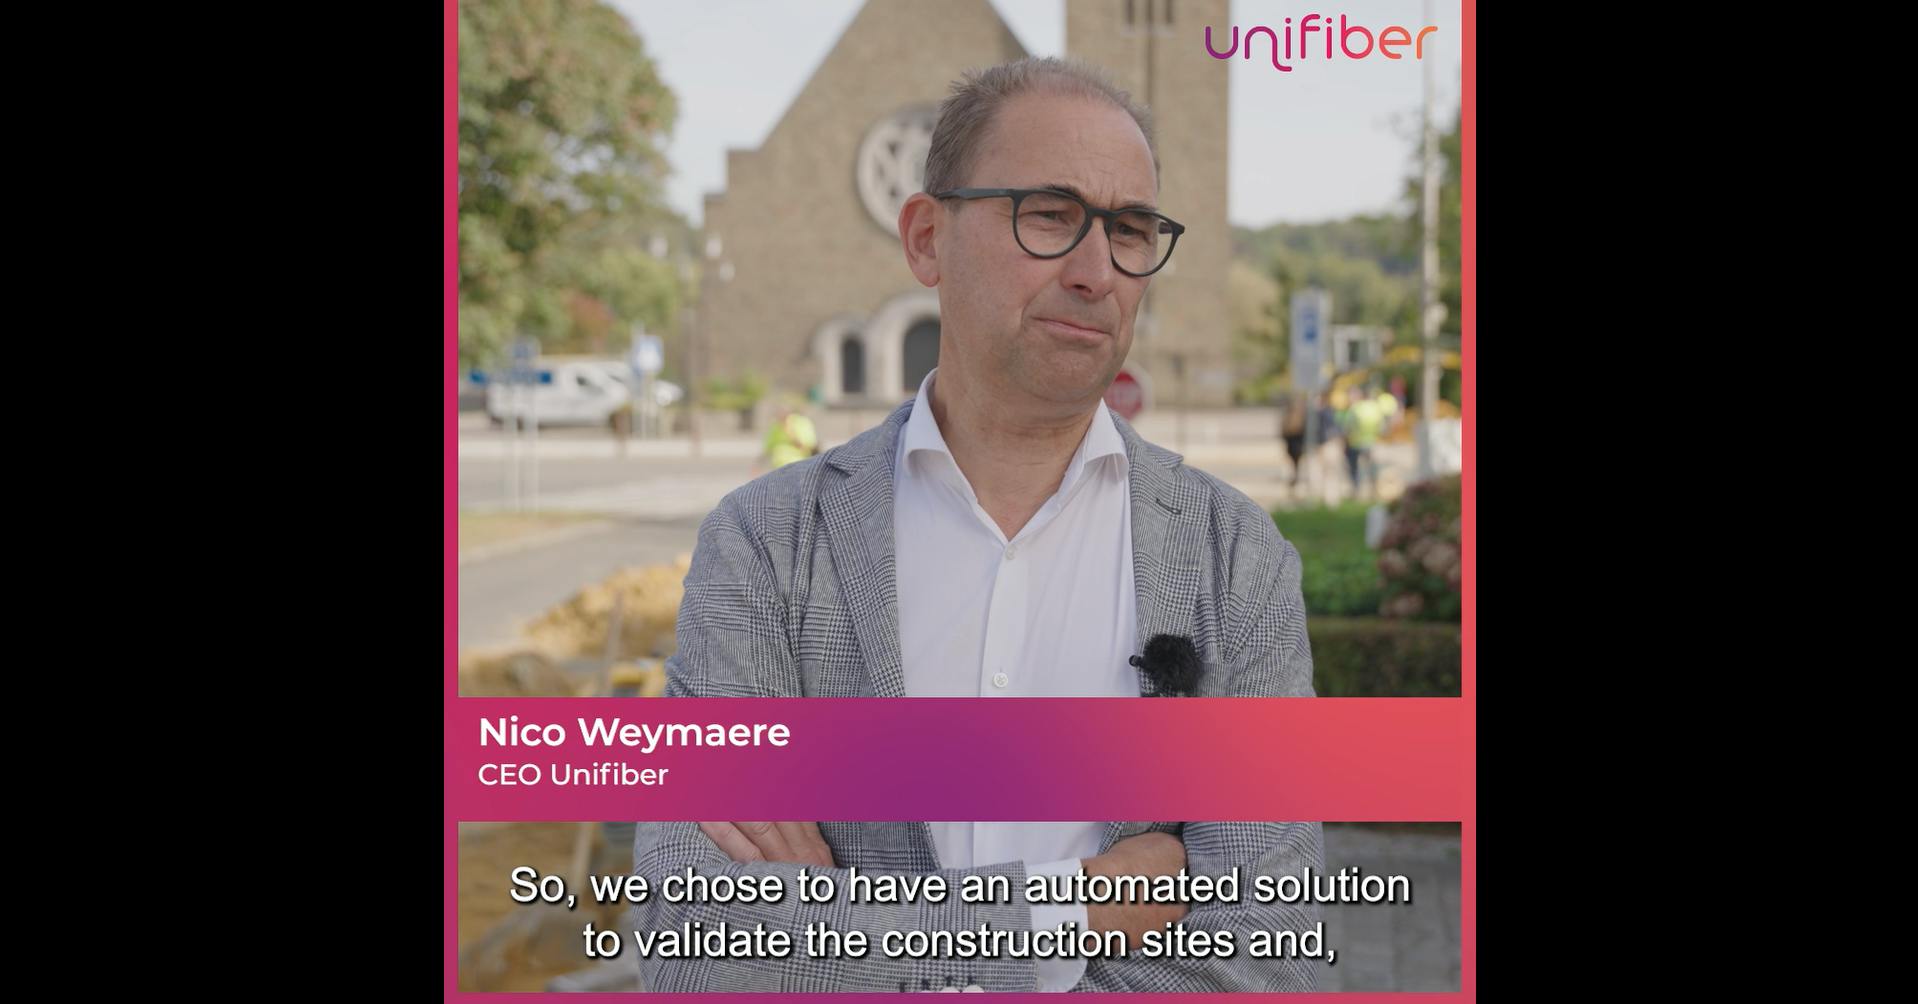 Nico Waymaere, CEO of Unifiber, talking about Deepomatic's solution